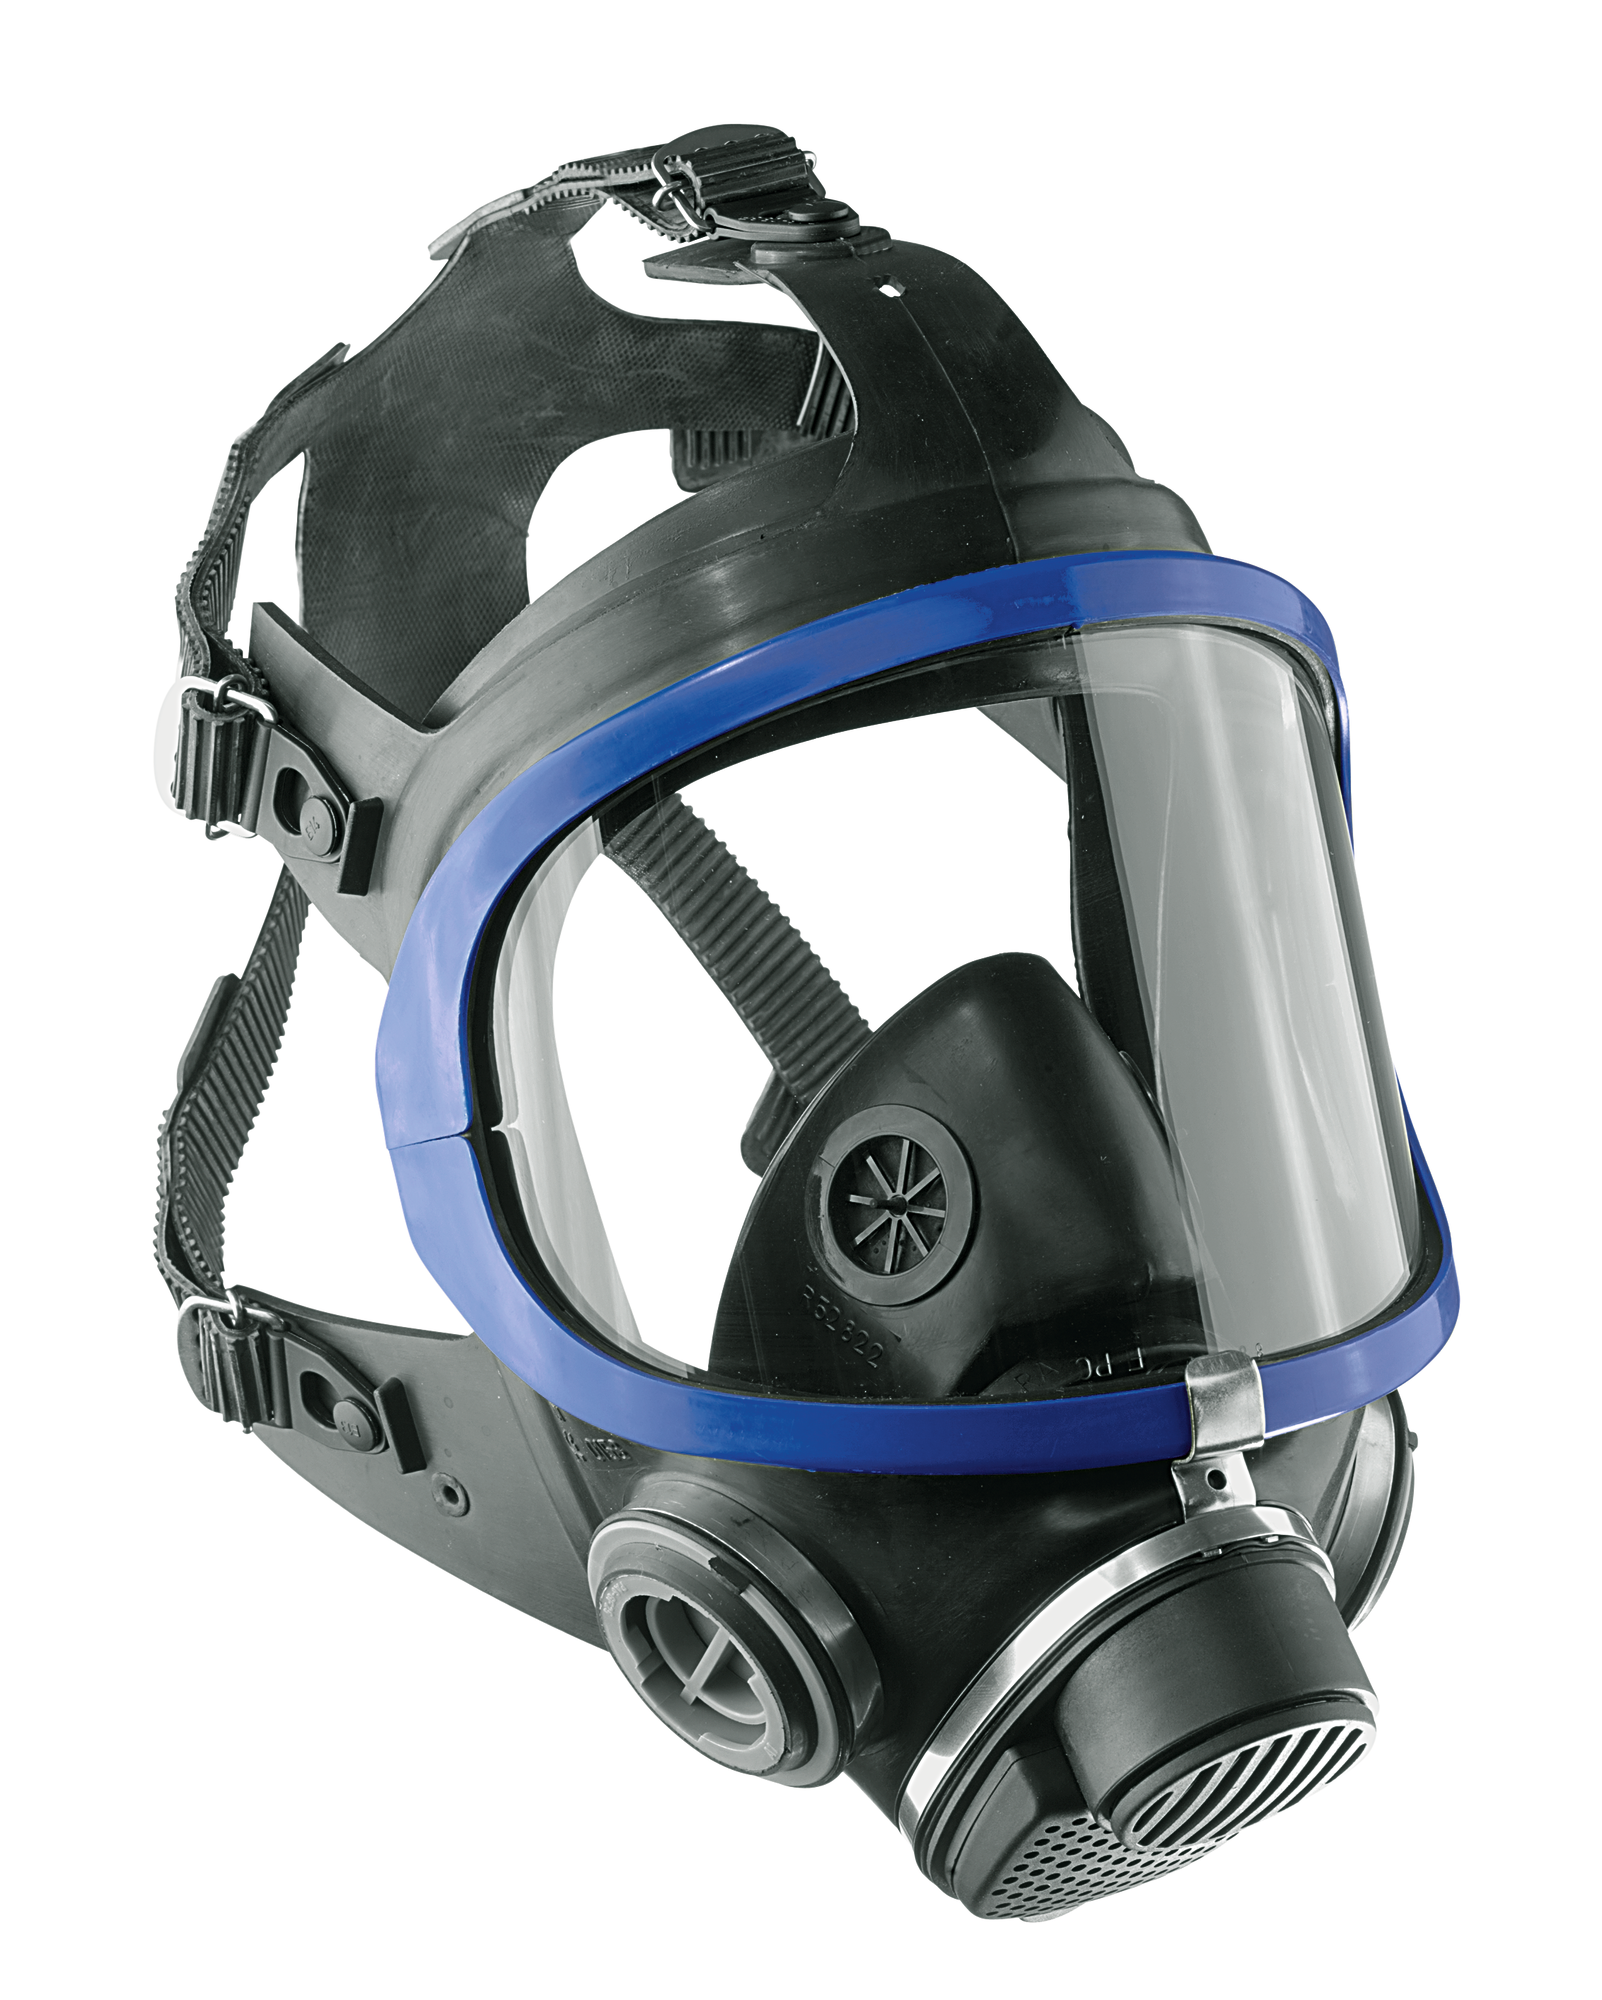 Draeger - X-Plore 5500 Full Face Mask with Twin Filter System (R55270)